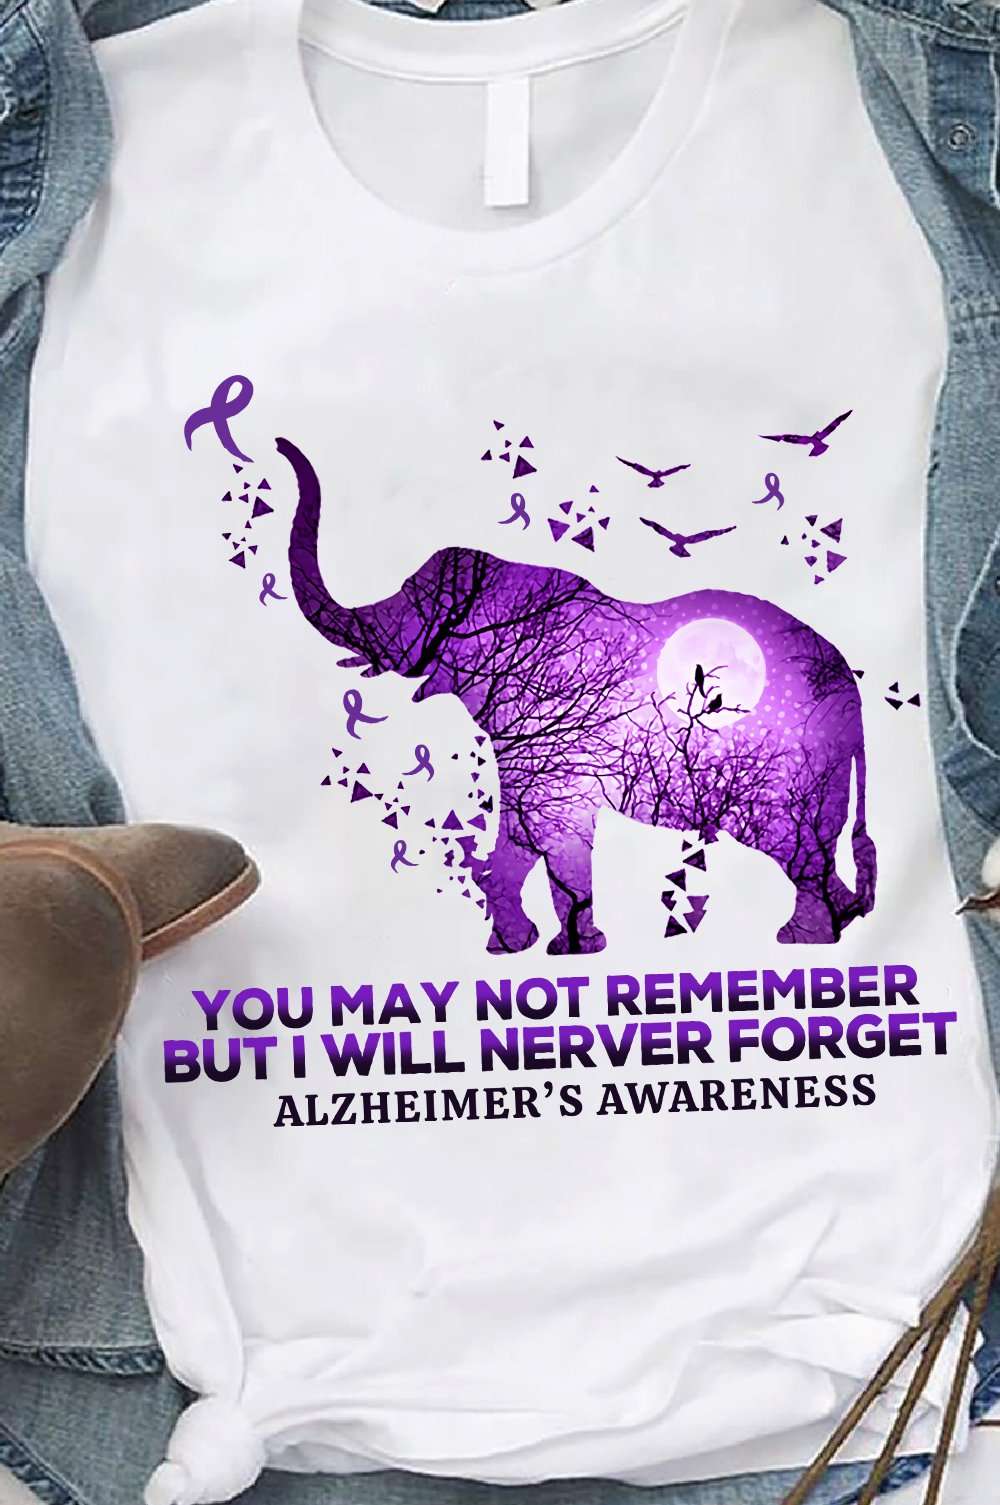 You may not remember but I will never forget - Alzheimer's awareness, alzheimer elephant ribbon